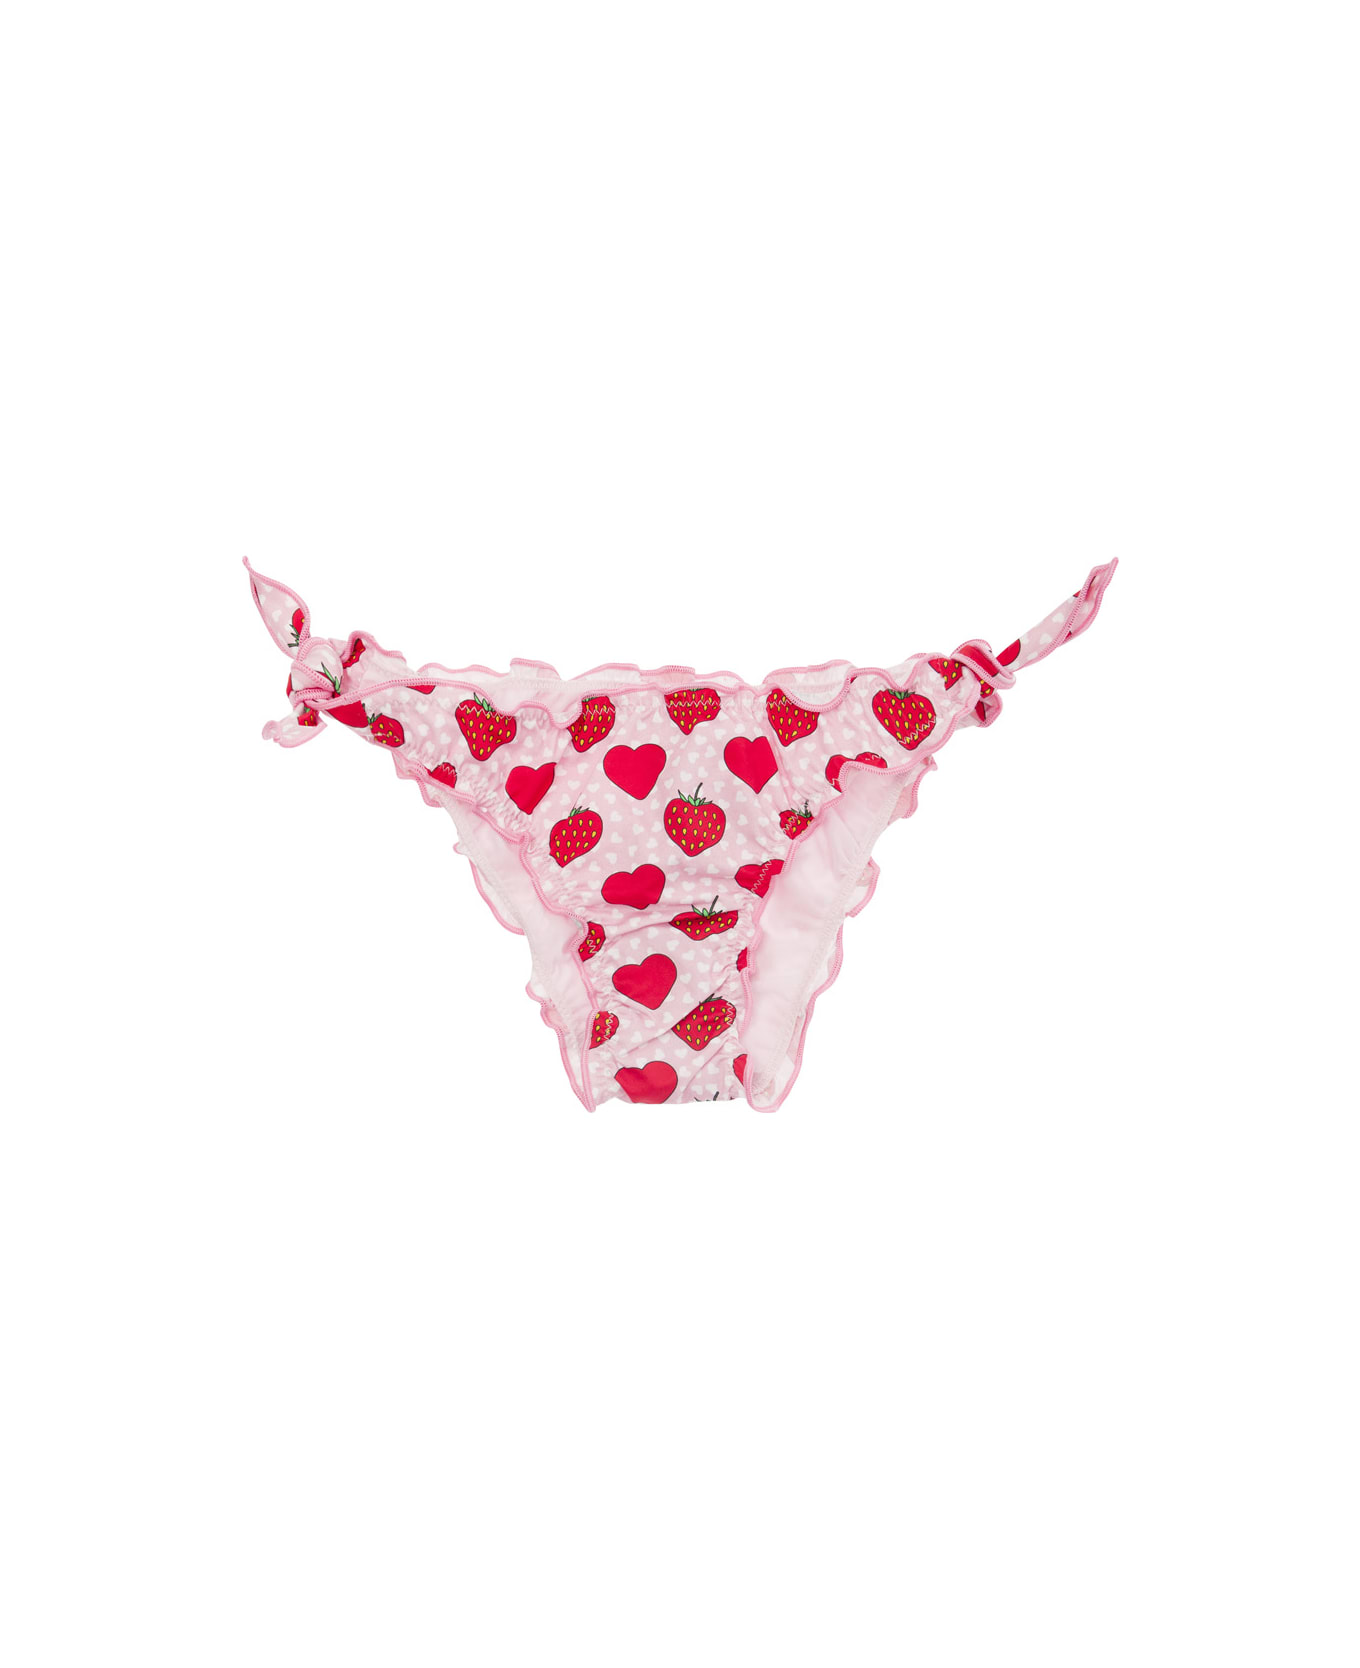 MC2 Saint Barth Pink And Red Bikini Bottom With Strawberry Print In Stretch Fabric Baby - Multicolor 水着